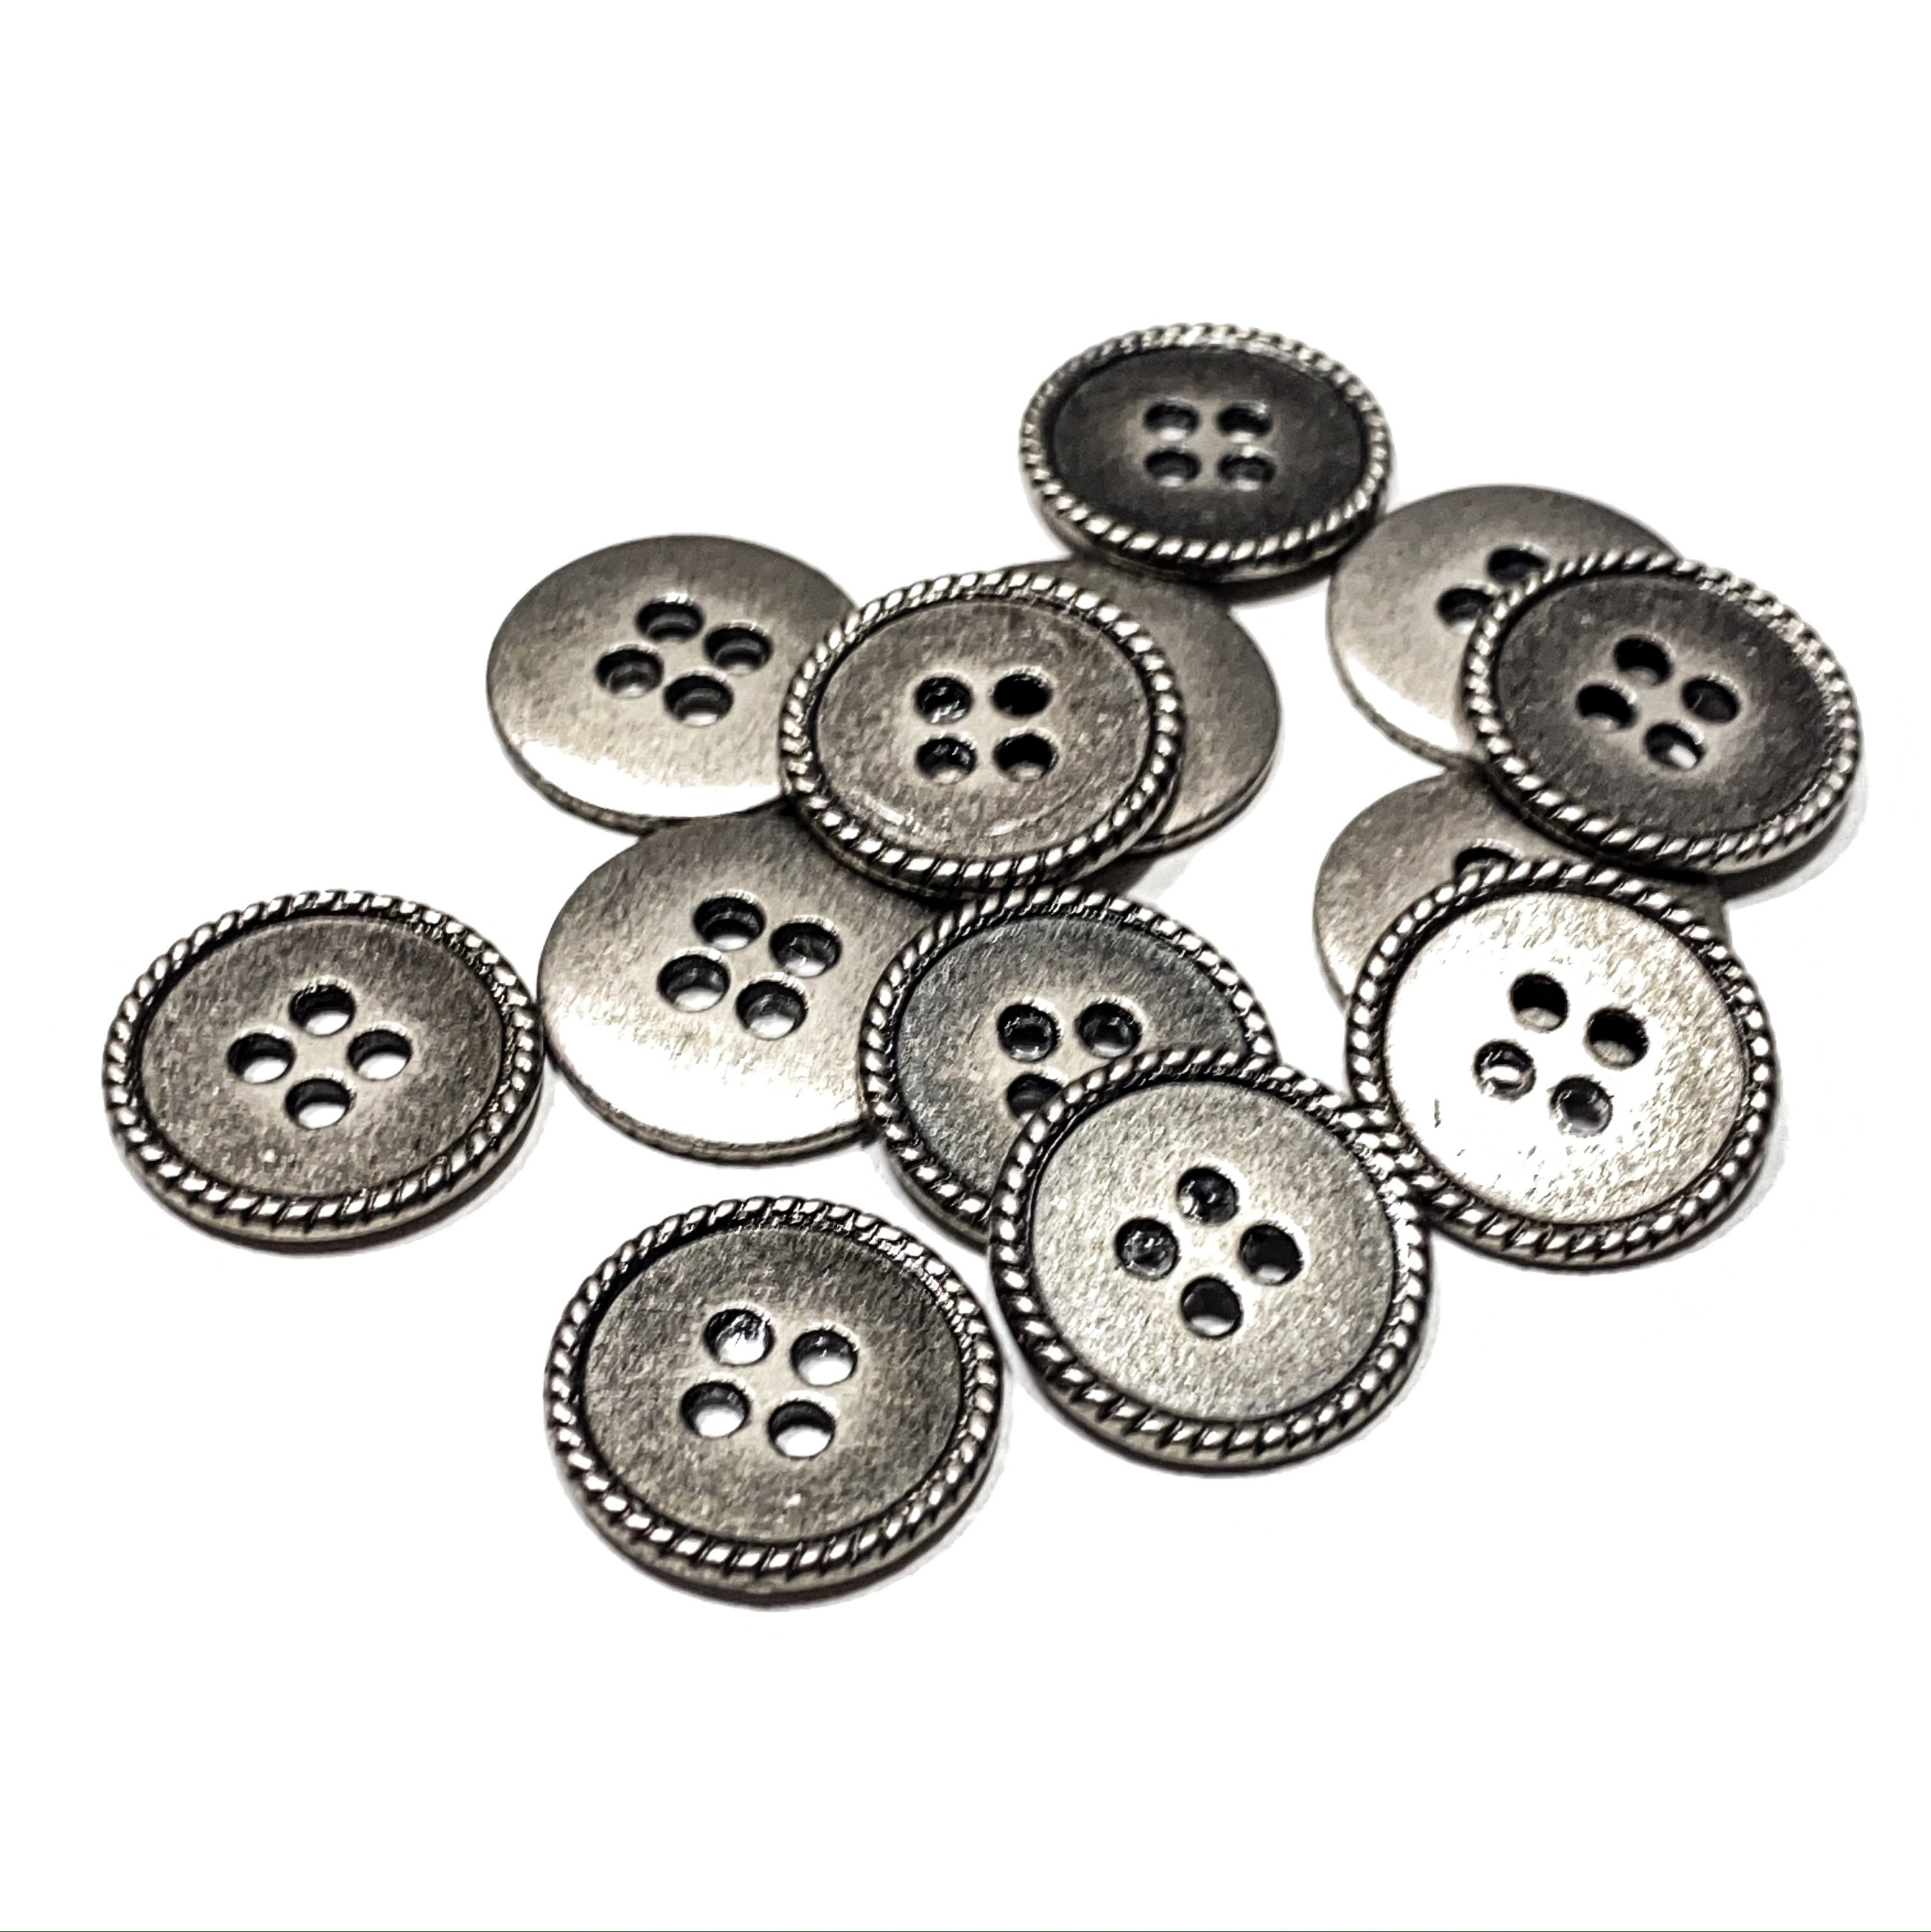 24 Vintage Metal Buttons Various Sizes From Collector's Estate SKU